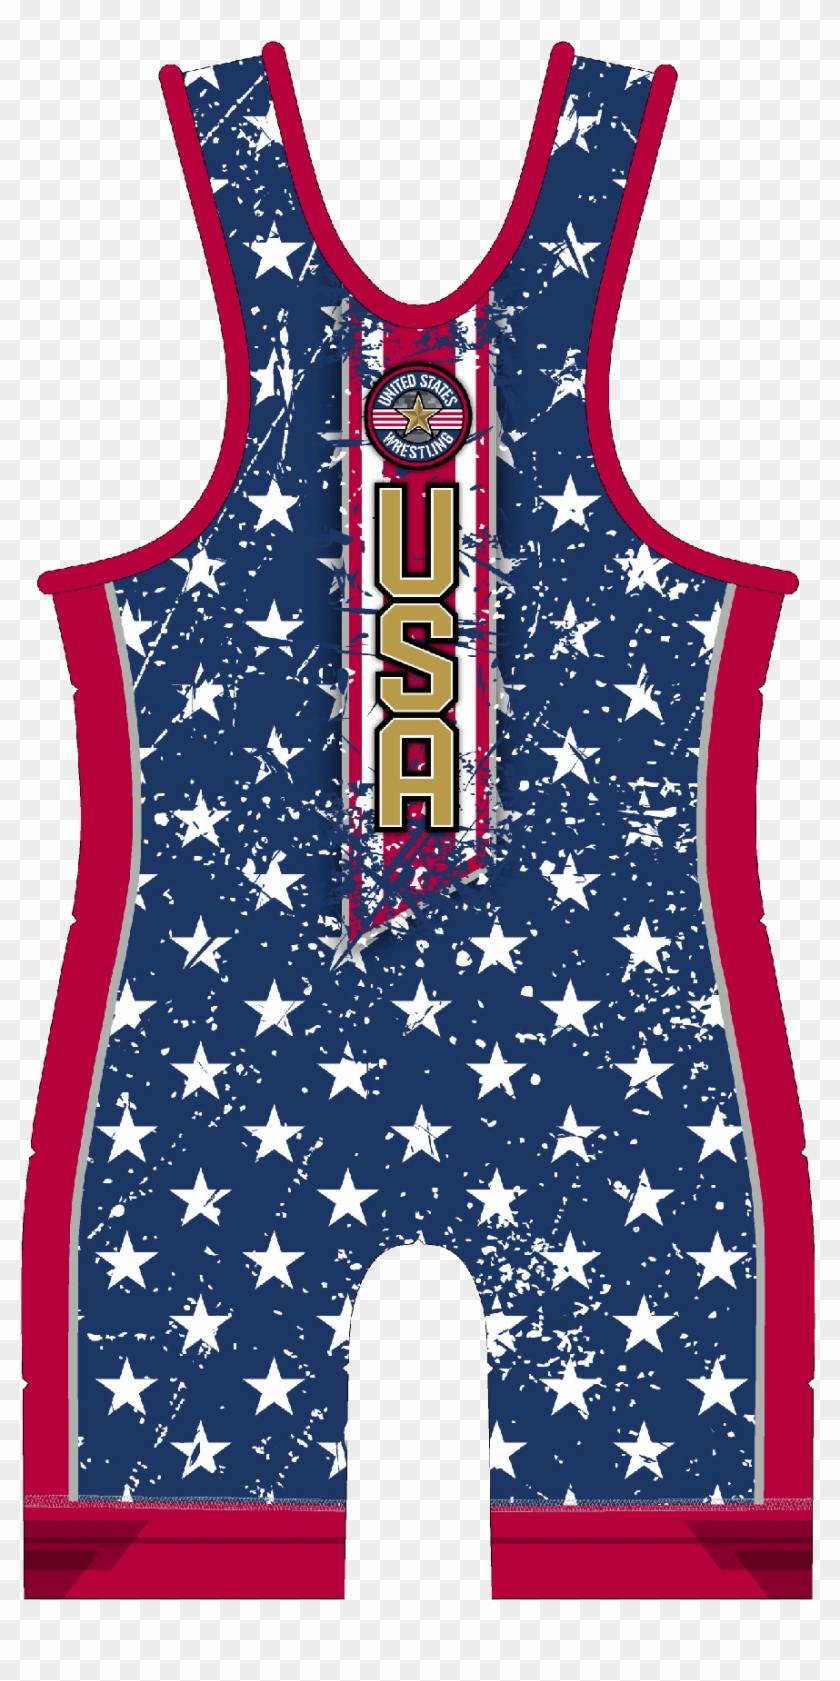 Stars And Stripes Sublimated - Stars And Stripes Sublimated #1569725